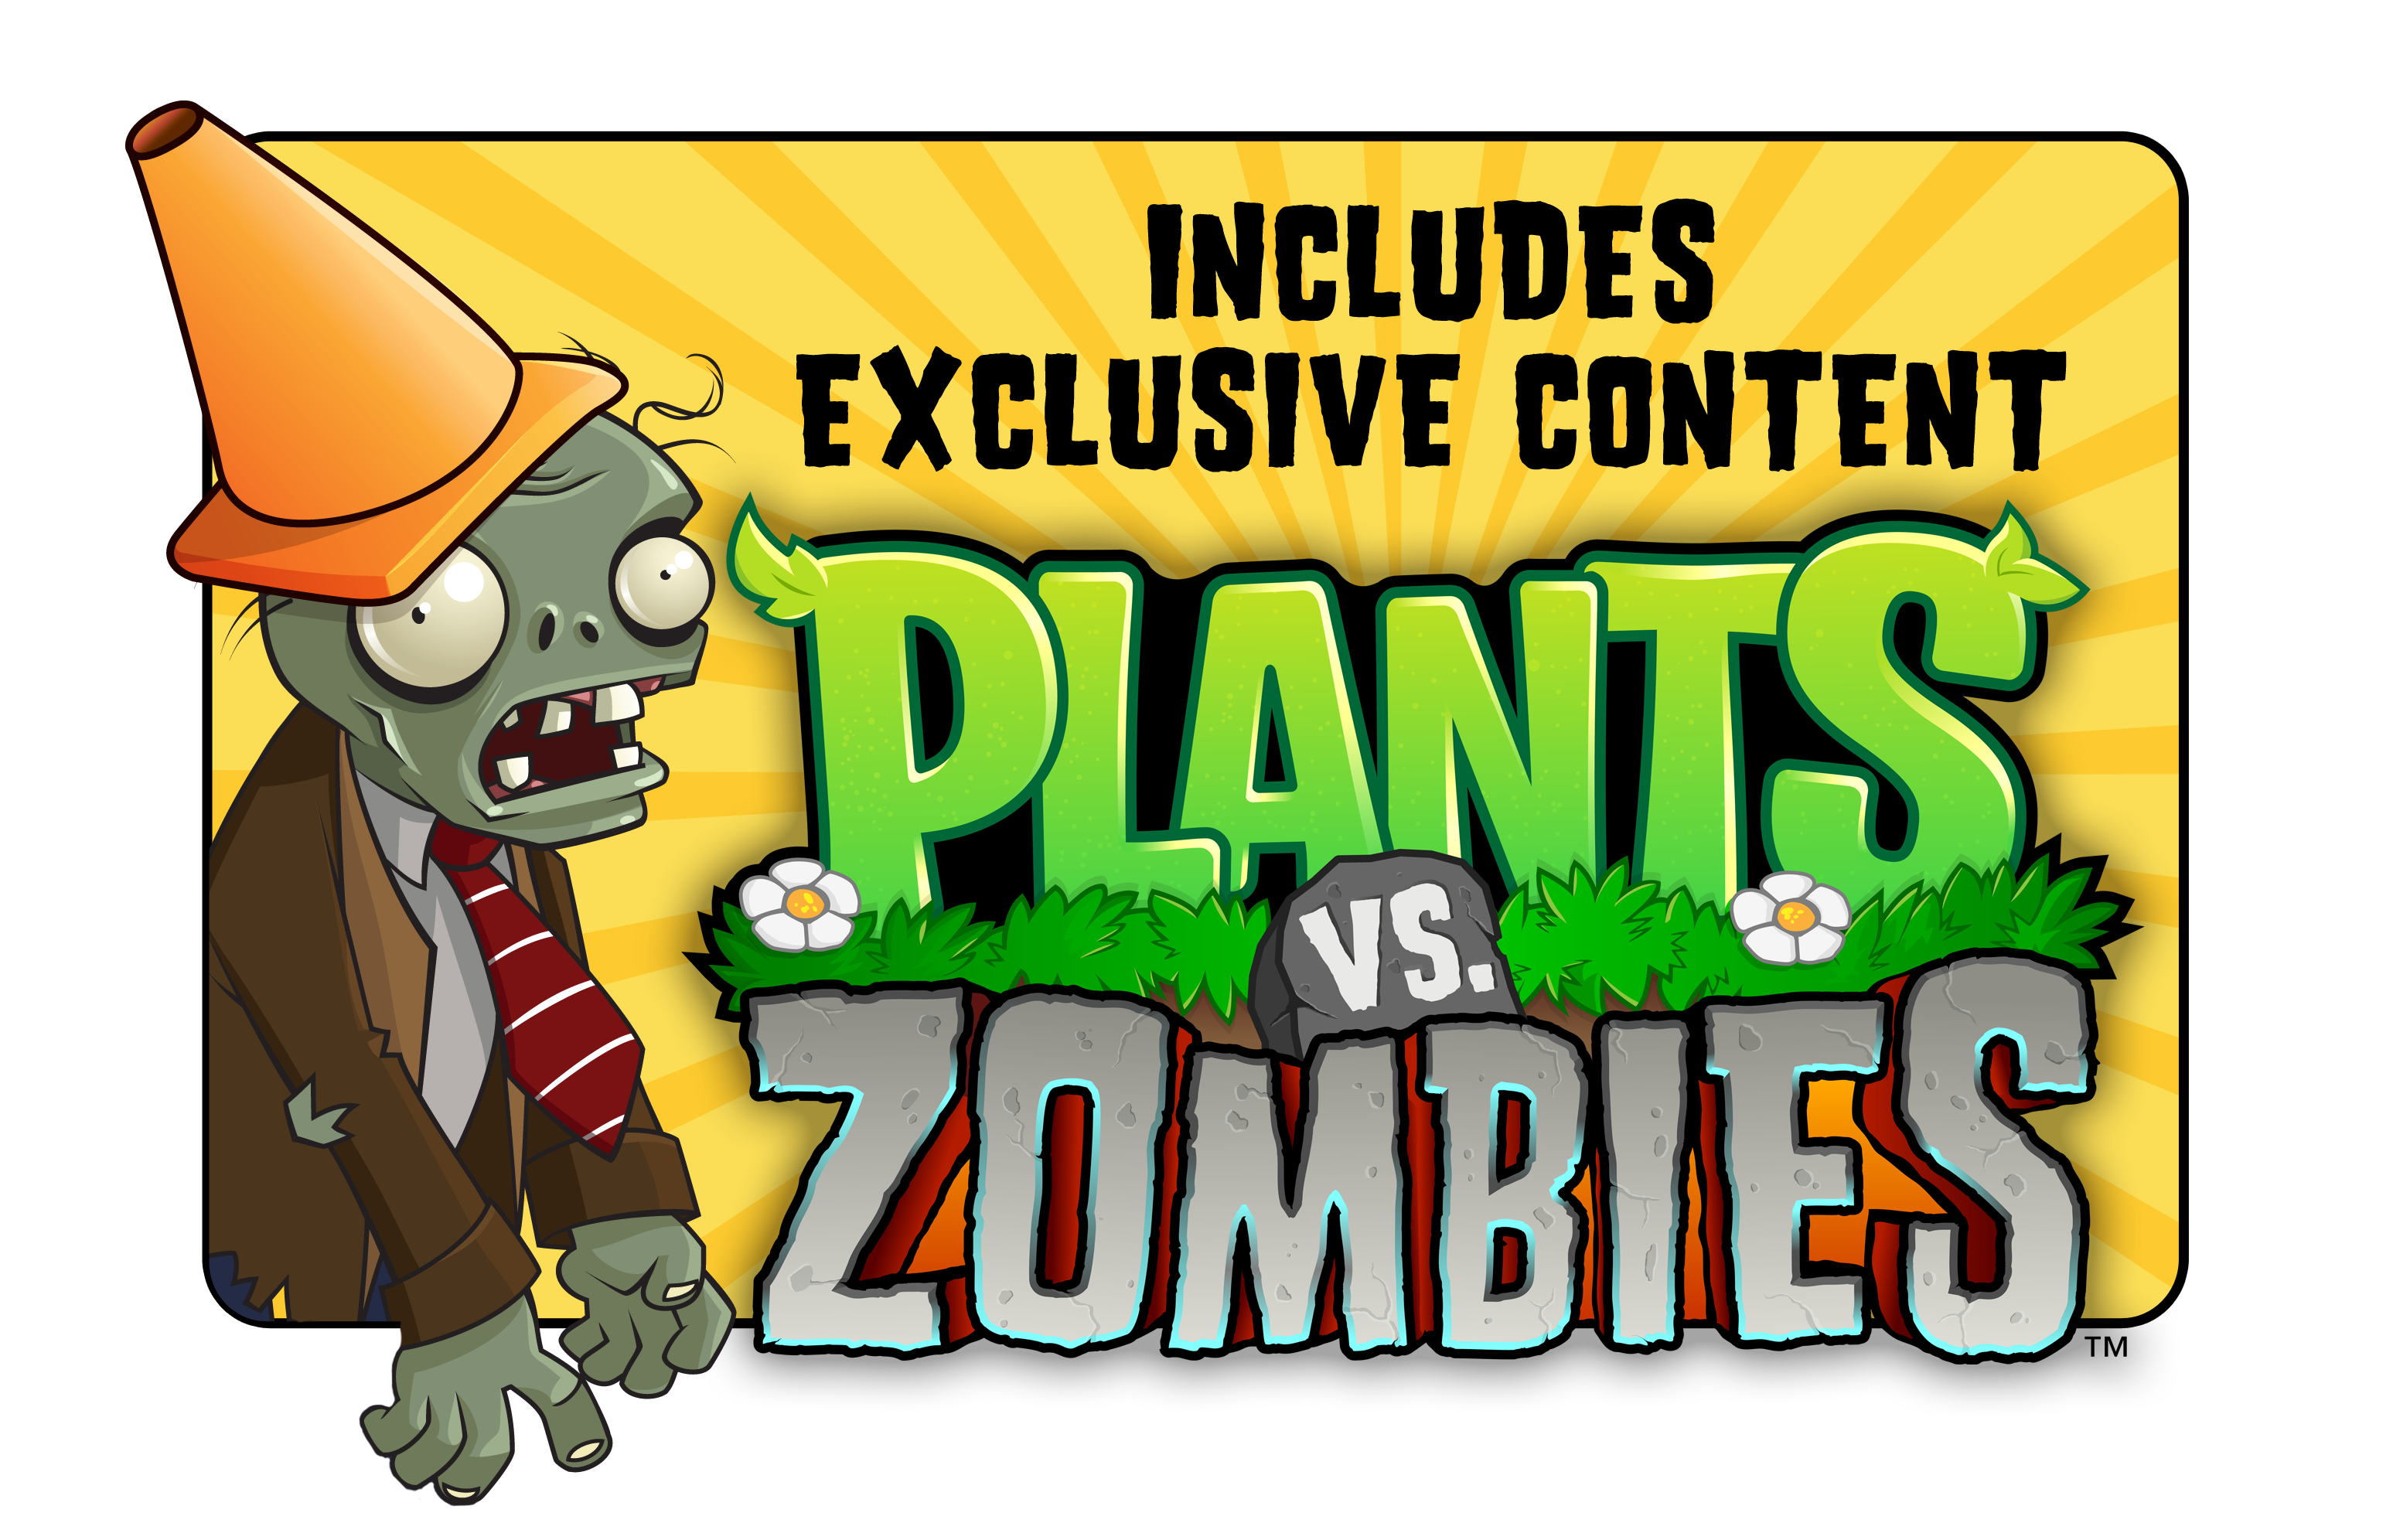 Sims 3: Supernatural' adds 'Plants vs. Zombies' to its pop culture appeal -  Polygon